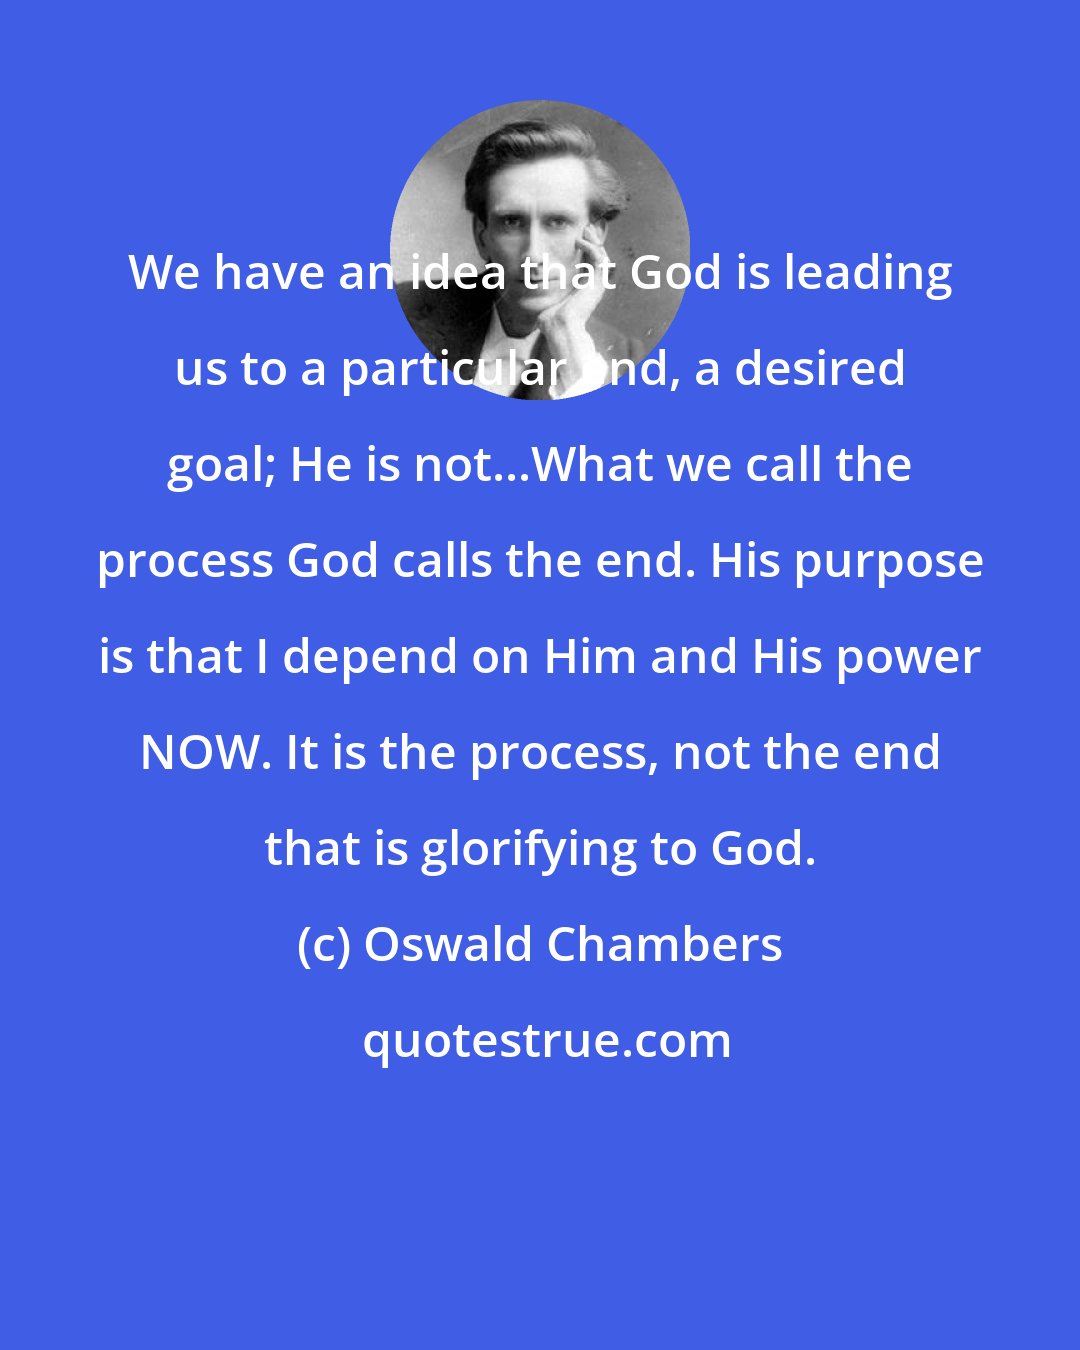 Oswald Chambers: We have an idea that God is leading us to a particular end, a desired goal; He is not...What we call the process God calls the end. His purpose is that I depend on Him and His power NOW. It is the process, not the end that is glorifying to God.